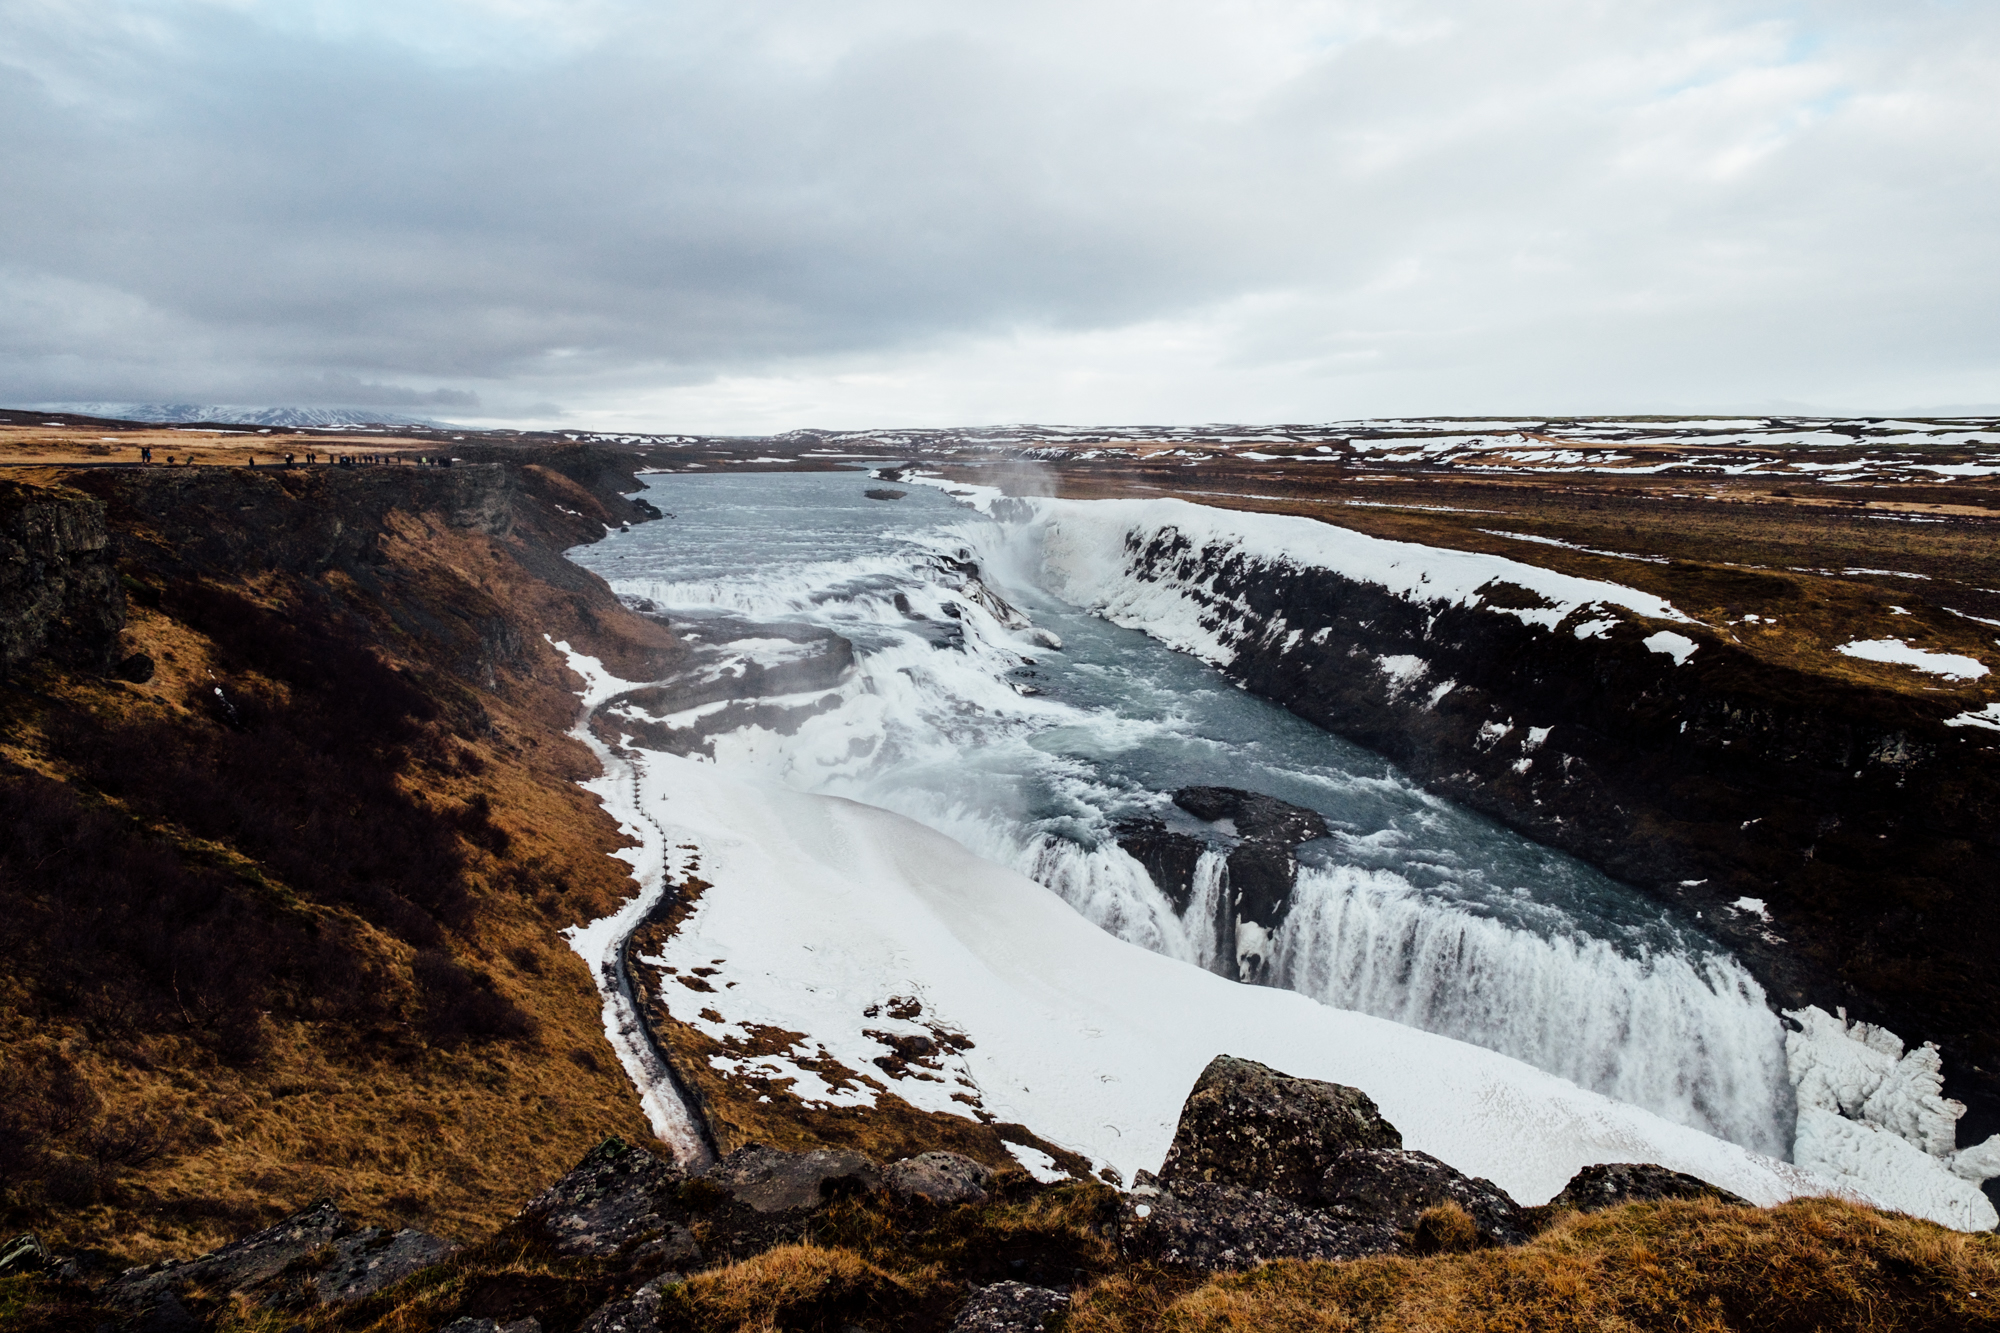  Our next stop was Gullfoss. Gullfoss is a huge waterfall (or convergence of a couple waterfalls, really) located in the canyon of Hvítá River. This is one of Iceland’s most popular landmarks, so it was crazy crowded. Still a great stop, although we 